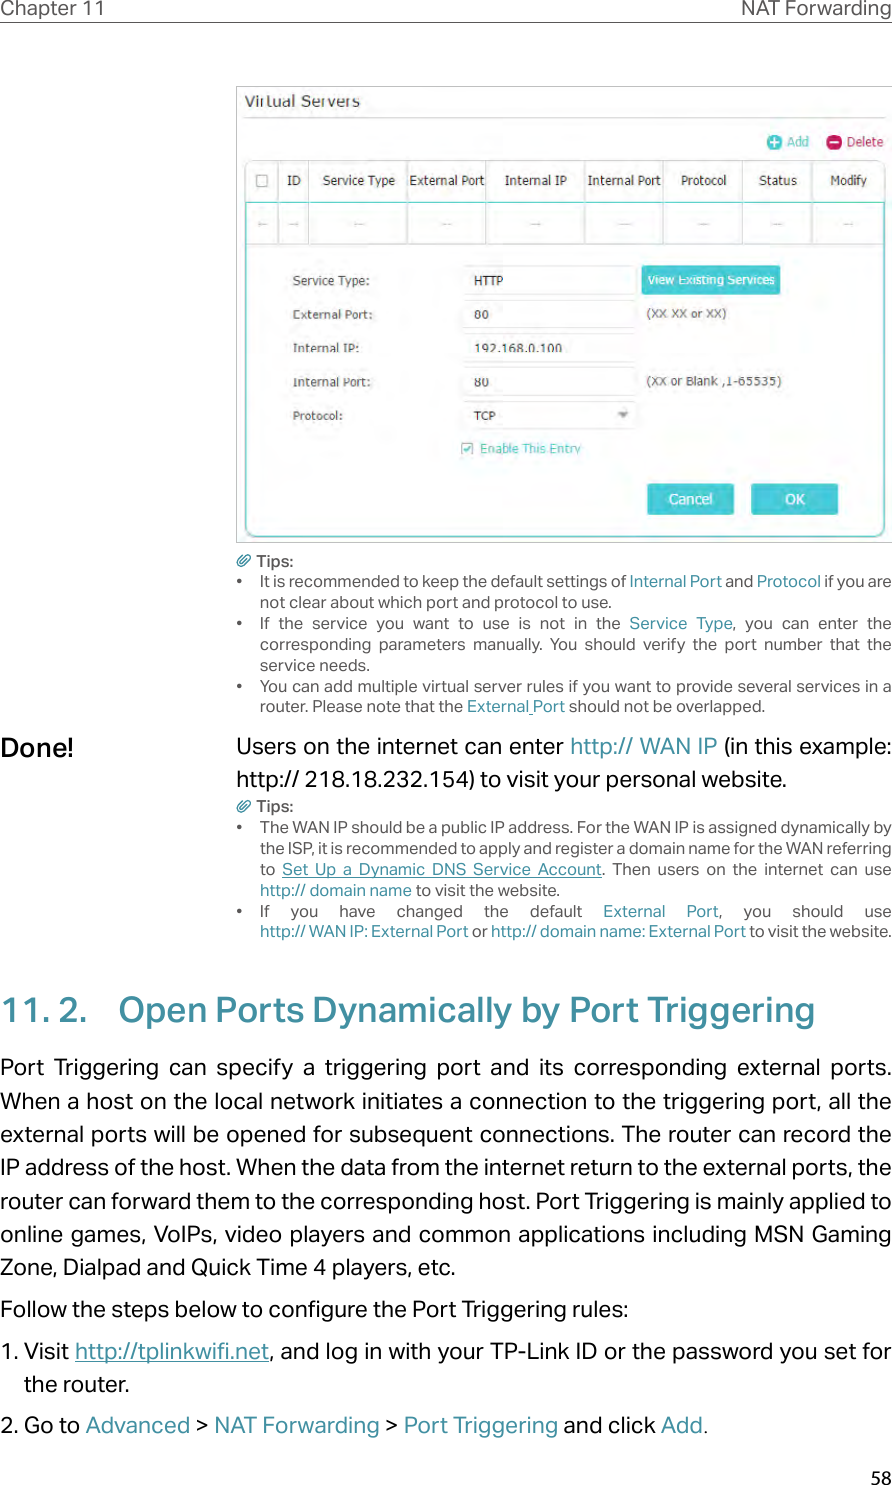 58Chapter 11 NAT ForwardingTips:•  It is recommended to keep the default settings of Internal Port and Protocol if you are not clear about which port and protocol to use.•  If the service you want to use is not in the Service Type, you can enter the corresponding parameters manually. You should verify the port number that the service needs.•  You can add multiple virtual server rules if you want to provide several services in a router. Please note that the External Port should not be overlapped.Users on the internet can enter http:// WAN IP (in this example: http:// 218.18.232.154) to visit your personal website.Tips:•  The WAN IP should be a public IP address. For the WAN IP is assigned dynamically by the ISP, it is recommended to apply and register a domain name for the WAN referring to  Set Up a Dynamic DNS Service Account. Then users on the internet can use  http:// domain name to visit the website.•  If you have changed the default External Port, you should use  http:// WAN IP: External Port or http:// domain name: External Port to visit the website.11. 2.  Open Ports Dynamically by Port TriggeringPort Triggering can specify a triggering port and its corresponding external ports. When a host on the local network initiates a connection to the triggering port, all the external ports will be opened for subsequent connections. The router can record the IP address of the host. When the data from the internet return to the external ports, the router can forward them to the corresponding host. Port Triggering is mainly applied to online games, VoIPs, video players and common applications including MSN Gaming Zone, Dialpad and Quick Time 4 players, etc. Follow the steps below to configure the Port Triggering rules:1. Visit http://tplinkwifi.net, and log in with your TP-Link ID or the password you set for the router.2. Go to Advanced &gt; NAT Forwarding &gt; Port Triggering and click Add.Done!